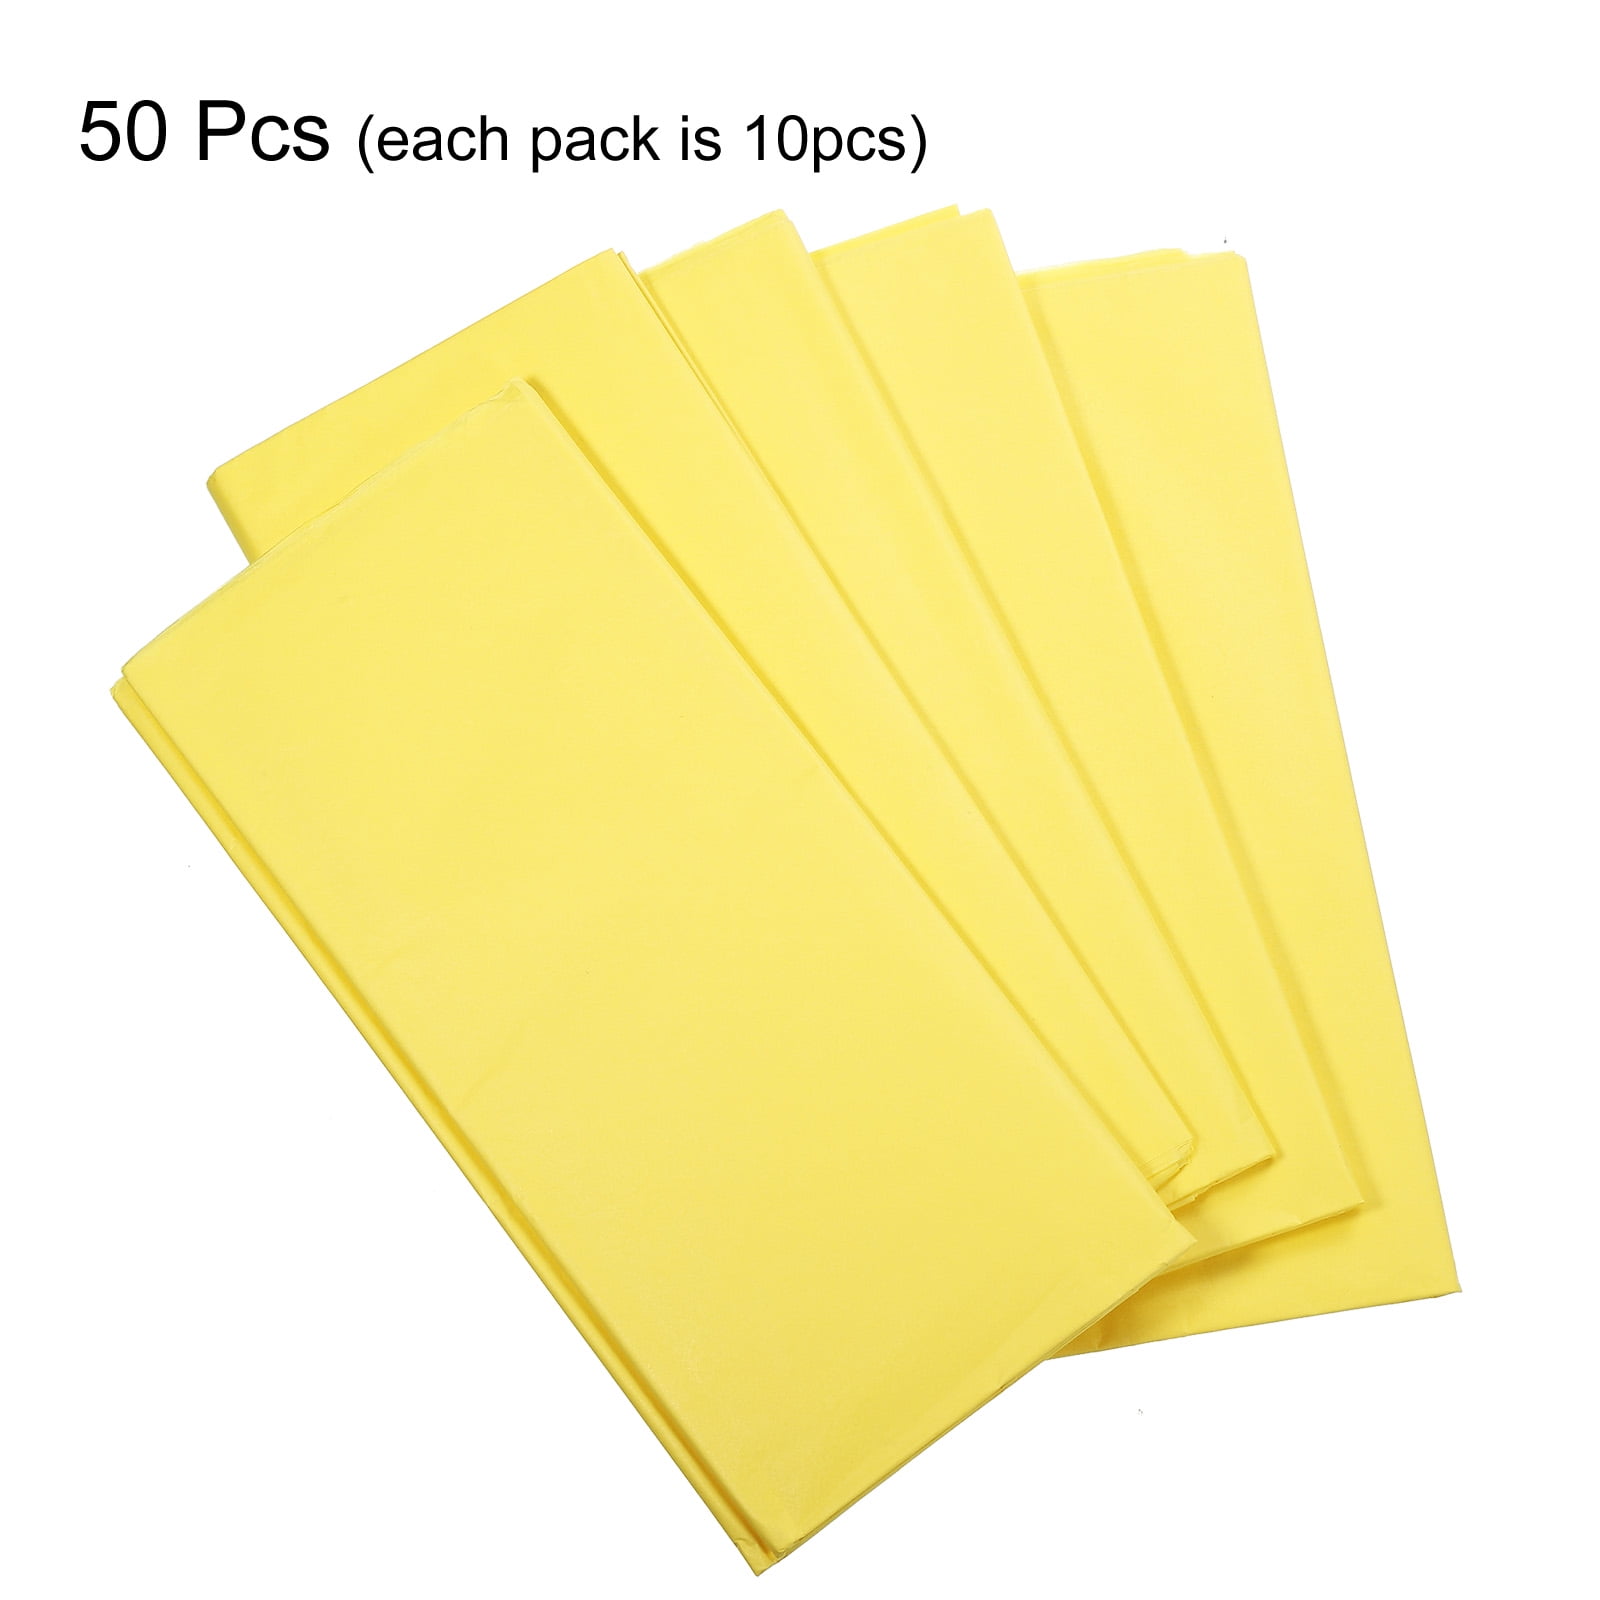 NEBURORA Yellow Tissue Paper for Gift Bags 60 Sheets Yellow Wrapping Tissue  Paper Bulk 14 X 20 Inch Bright Yellow Packaging Paper for Gift Wrap Filler